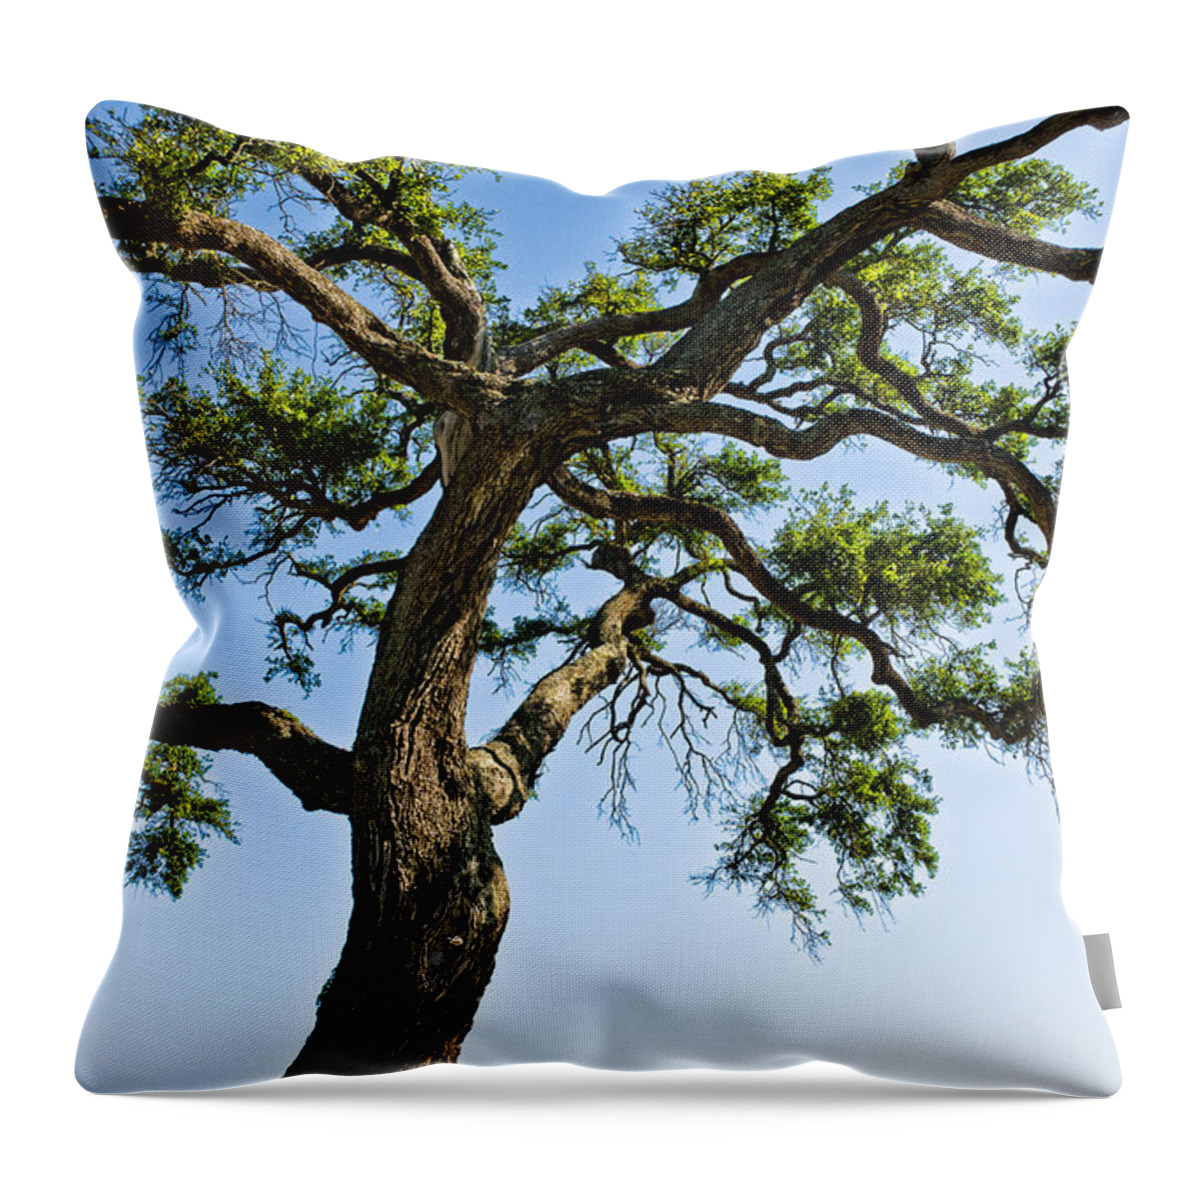 Tree Throw Pillow featuring the photograph Oak At The Beach by Christopher Holmes